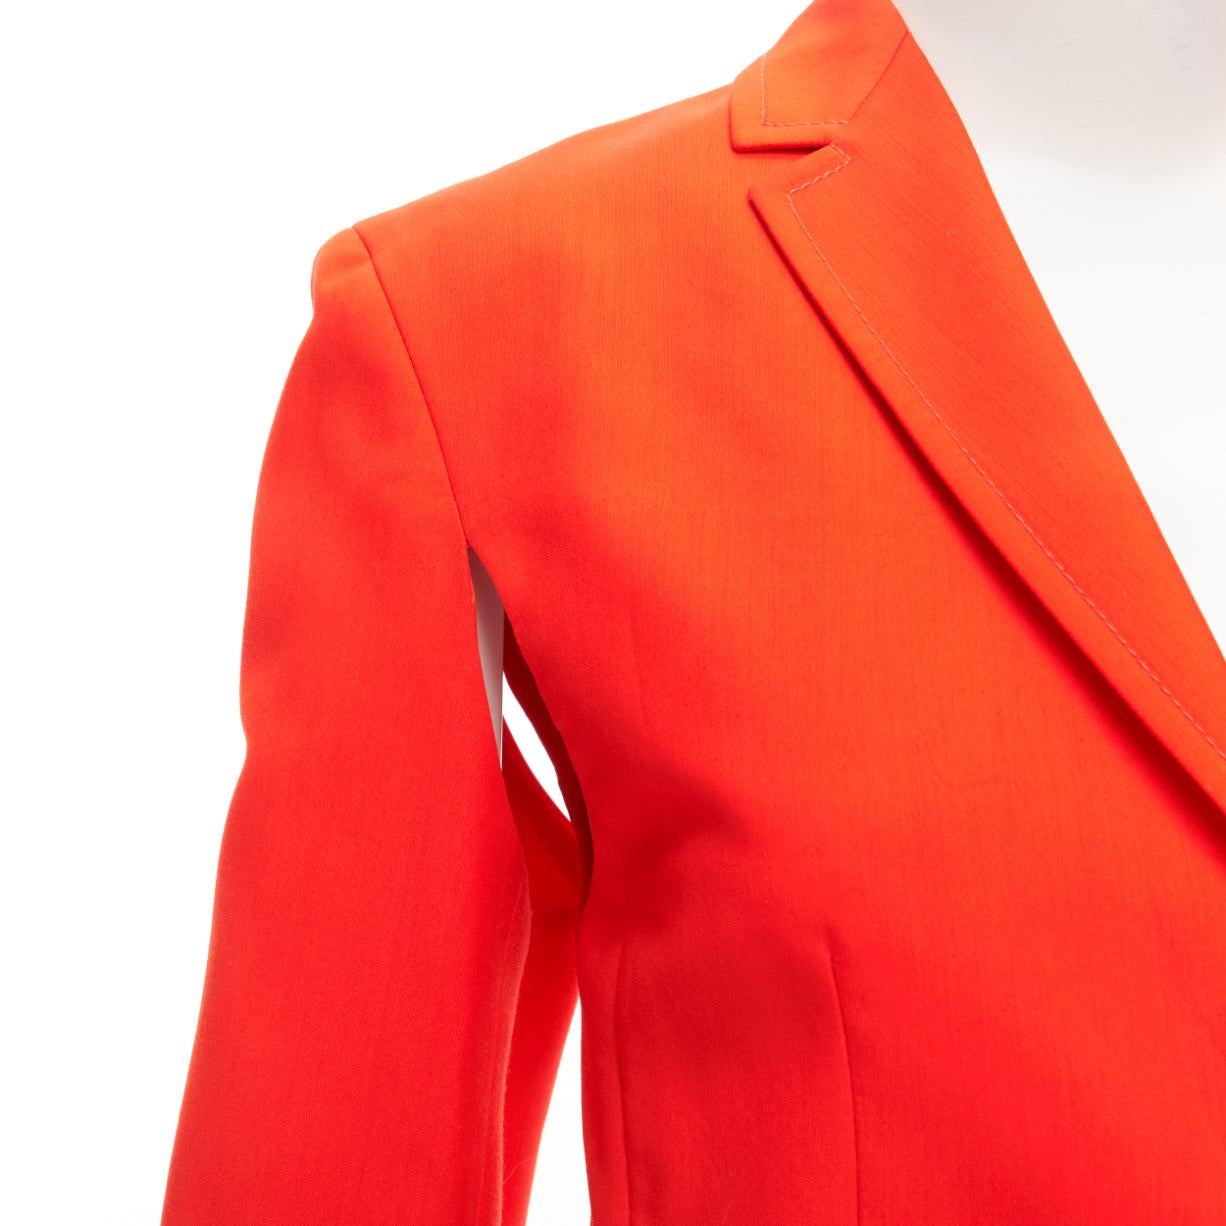 PORTS 1961 neon orange wool silk underarm cut out asymmetric blazer FR36 S
Reference: NKLL/A00185
Brand: Ports 1961
Material: Wool, Silk
Color: Orange
Pattern: Solid
Closure: Button
Lining: Orange Fabric
Extra Details: Underarm and back cutout